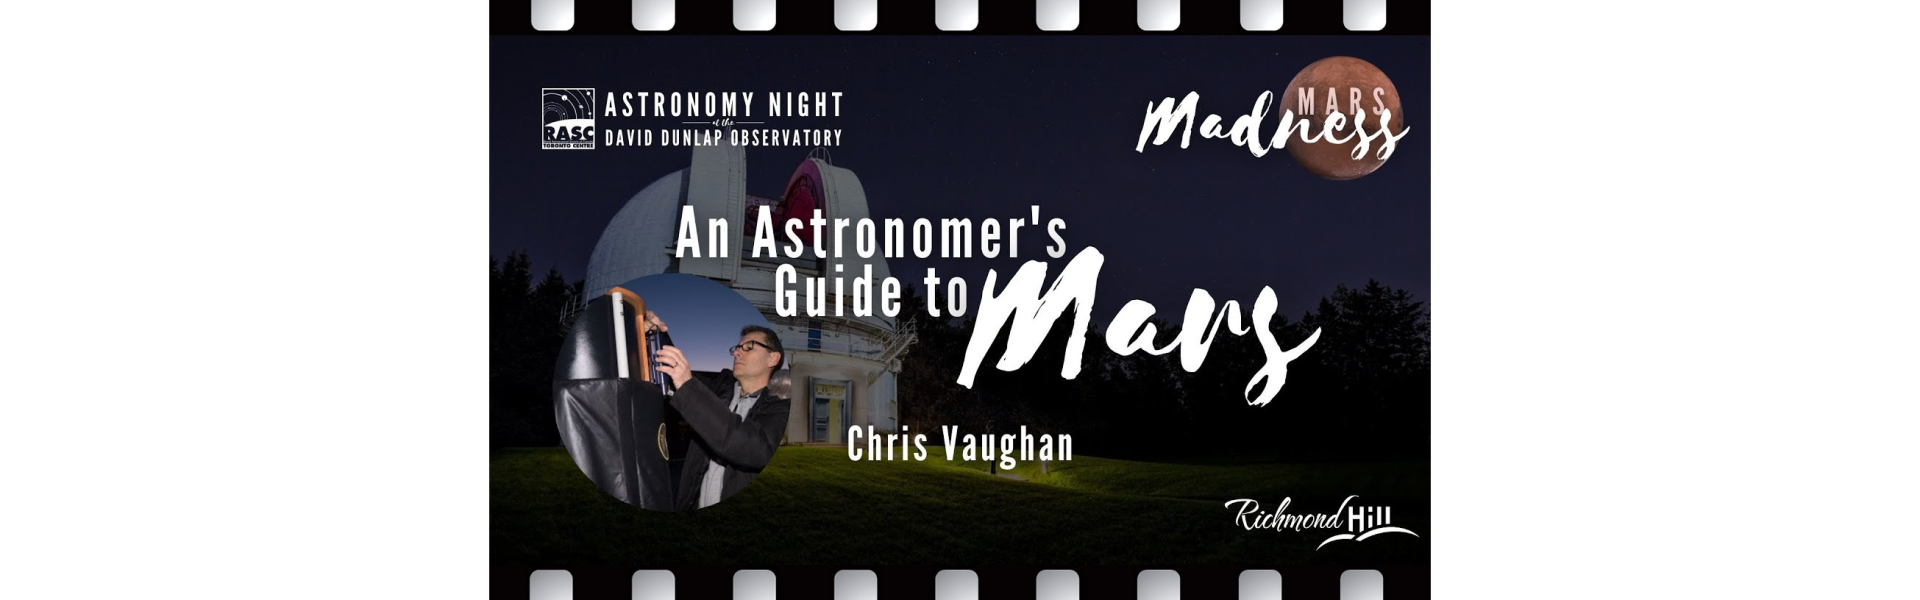 An Astronomer's Guide to Mars